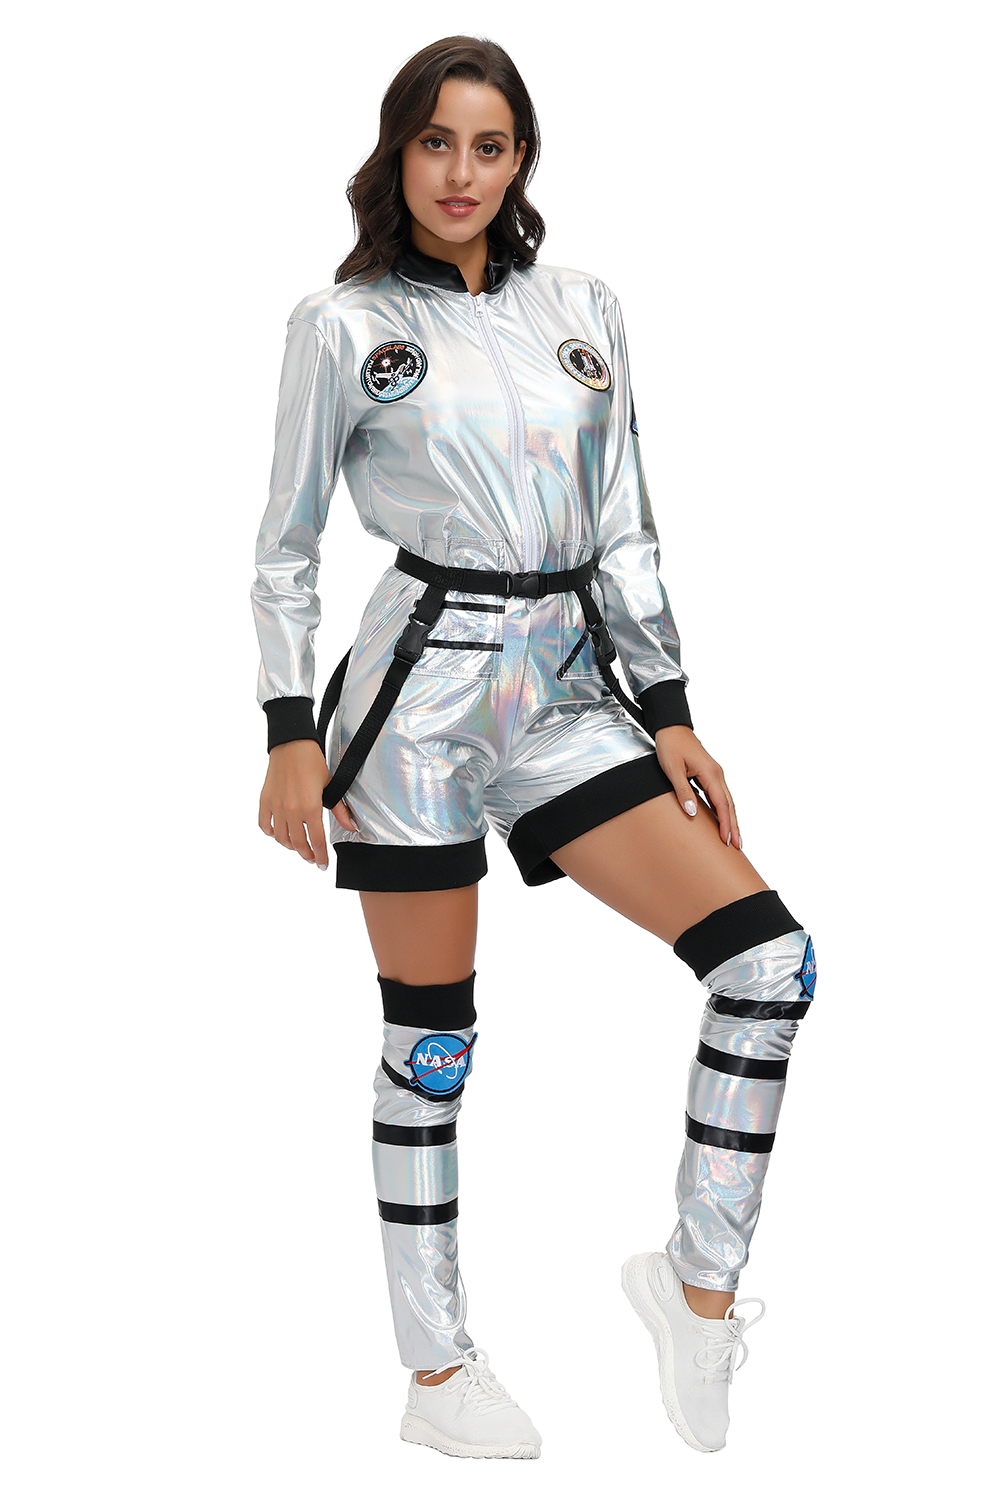 New Arrival Adult Astronaut Space Jumpsuit Halloween Cosplay